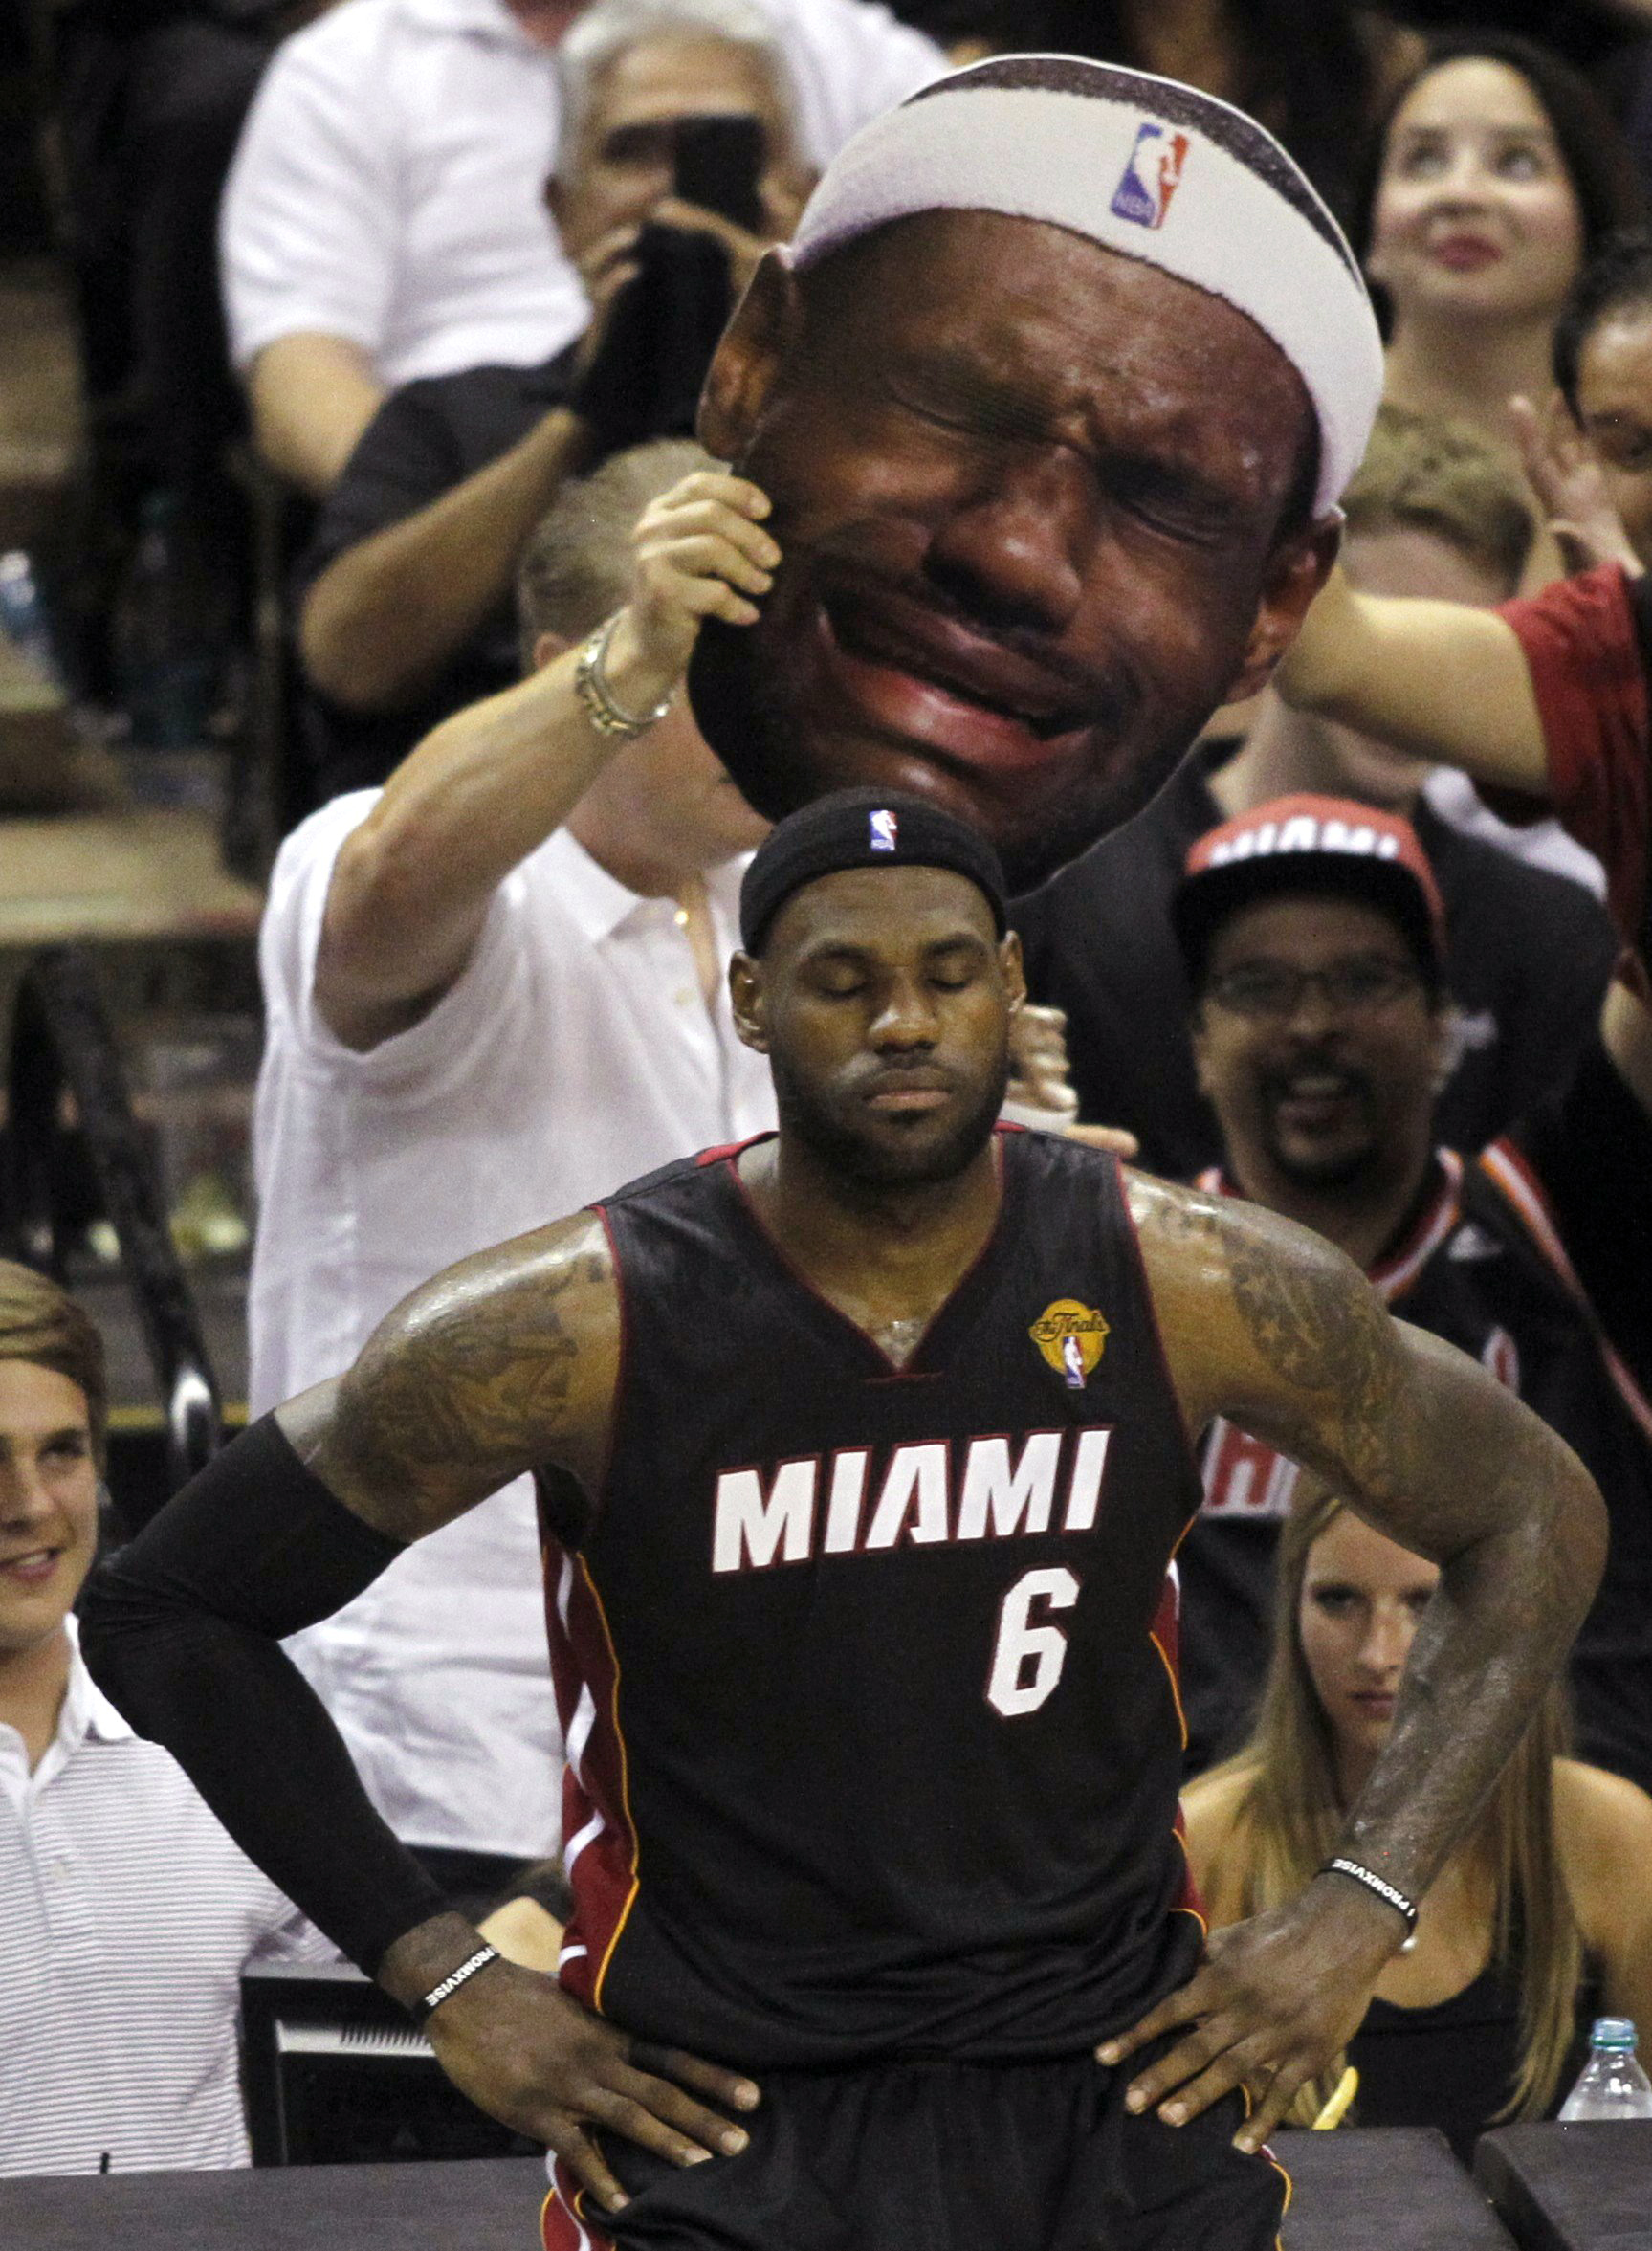 San Antonio Spurs fans taunt Miami Heat's LeBron James during the third quarter in Game 2 of their NBA Finals basketball series in San Antonio on June 8, 2014.